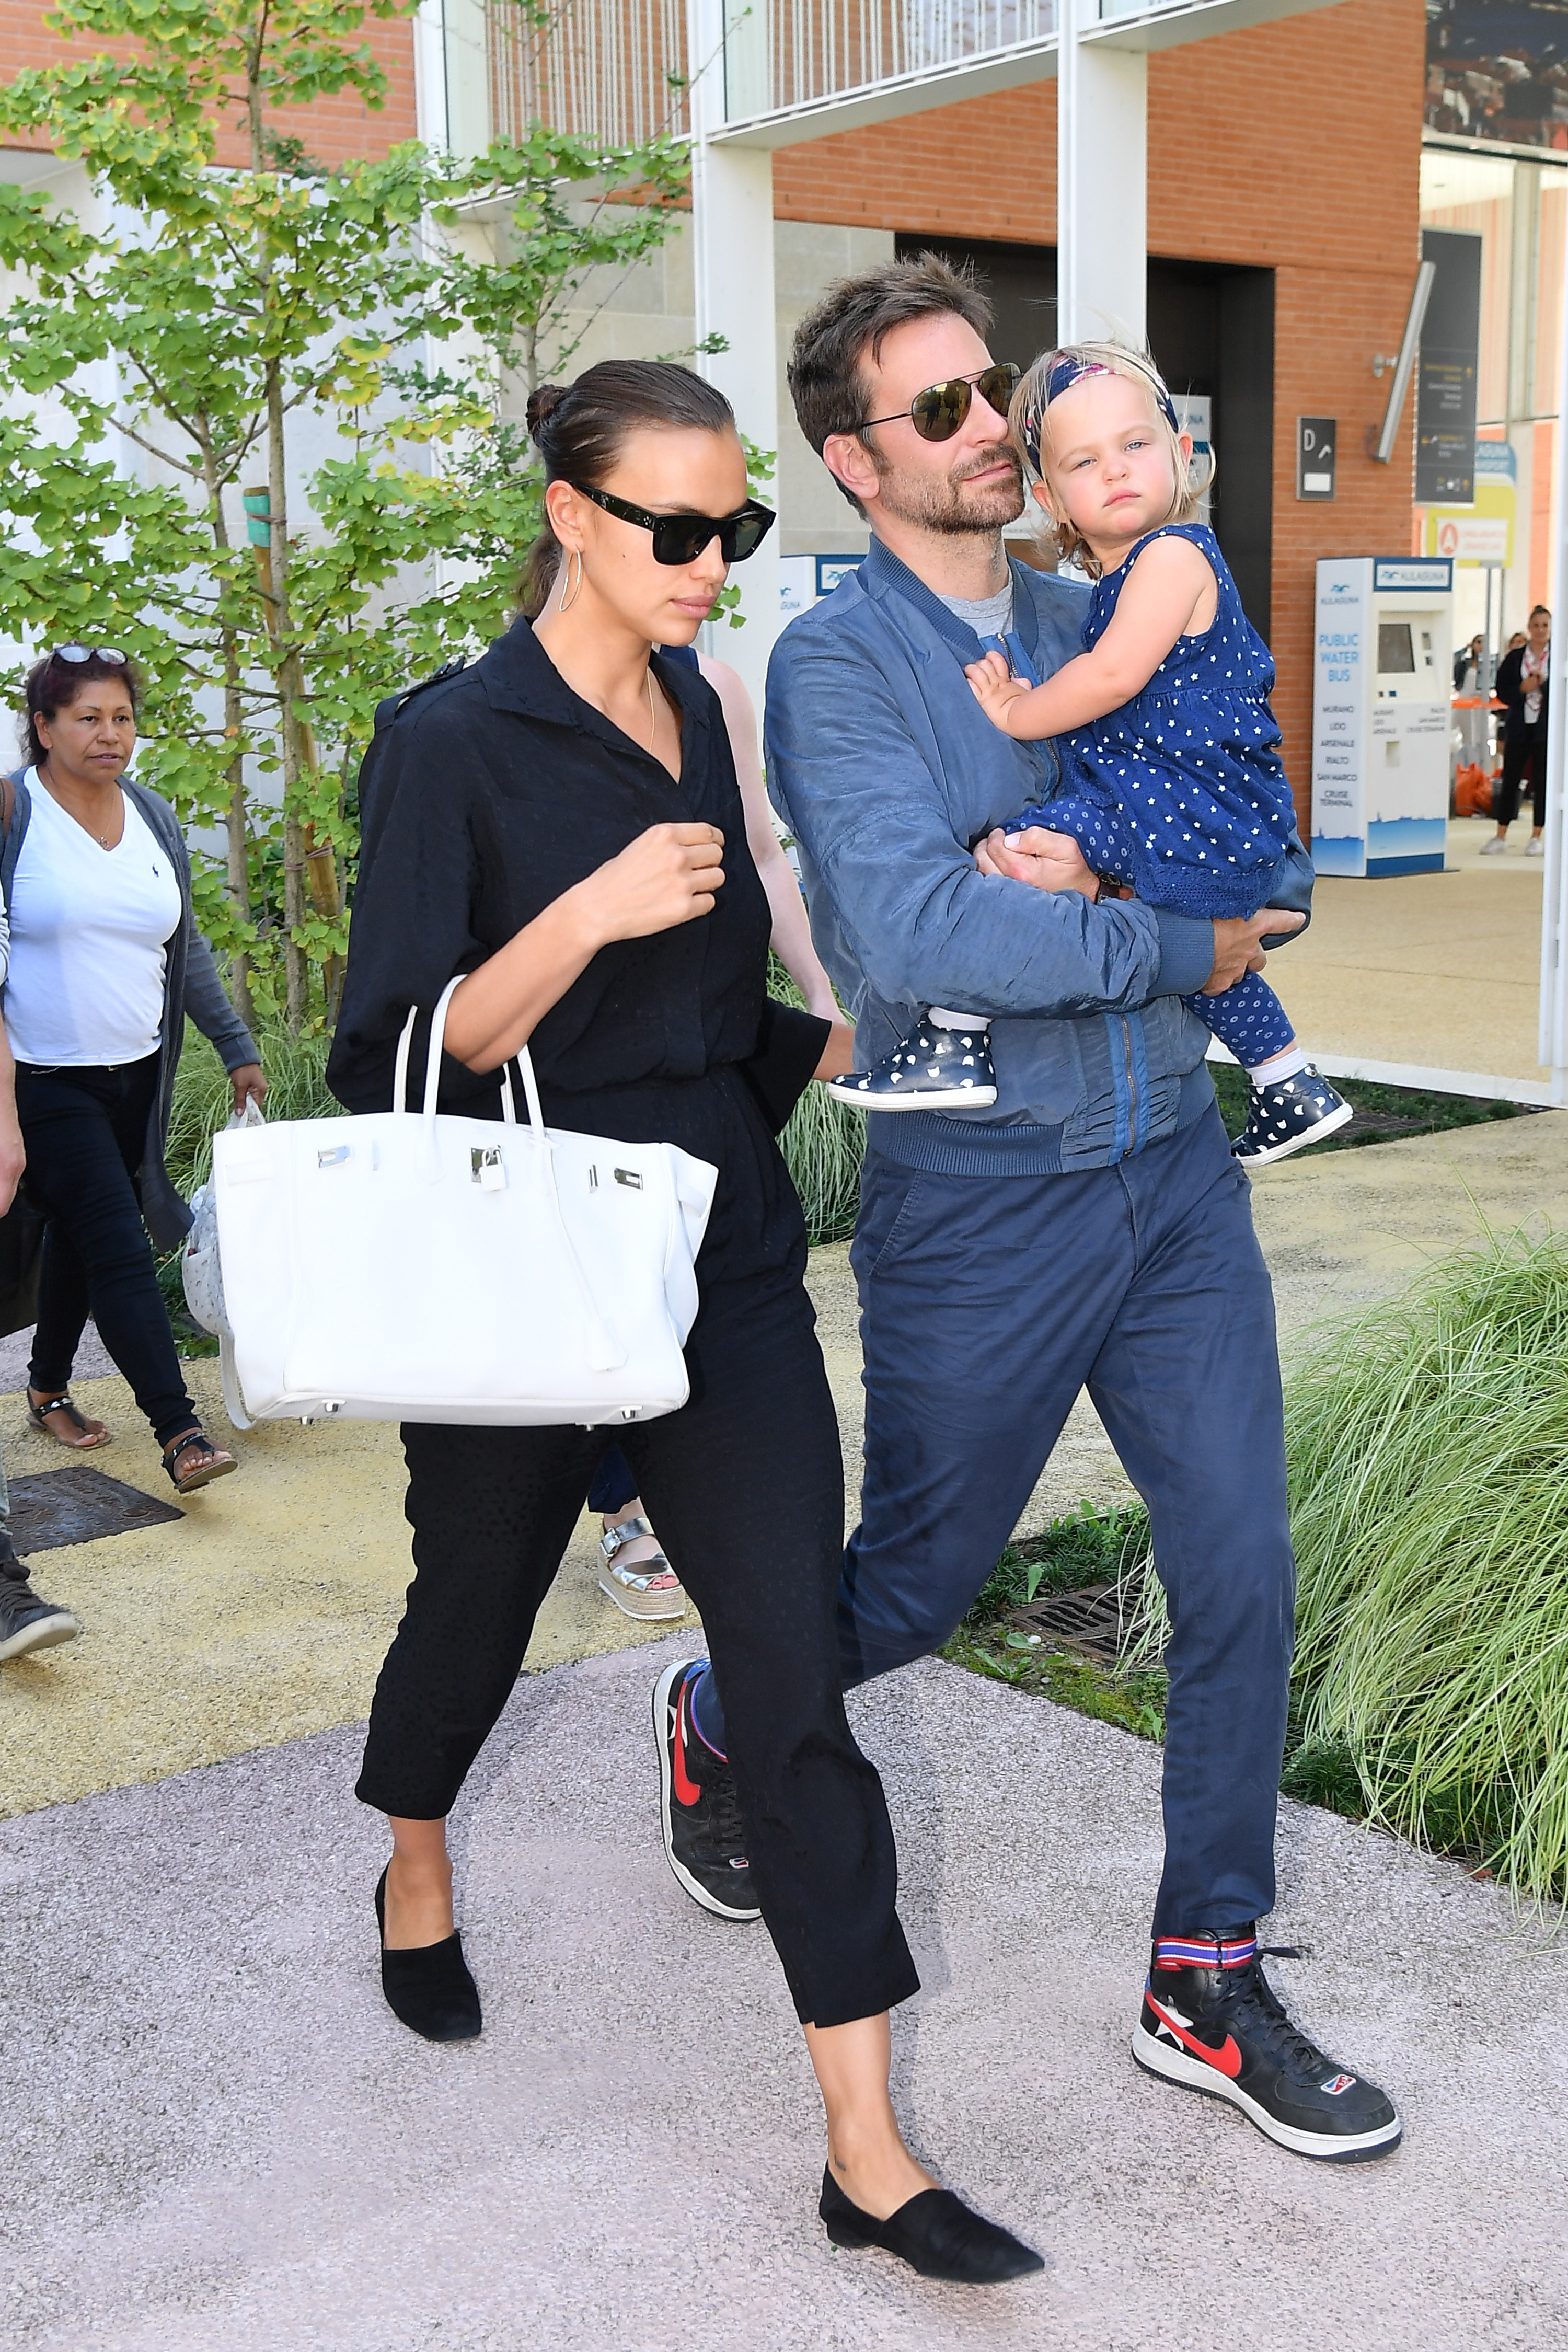 Bradley Cooper, Irina Shayk, and their daughter Lea arrive at the 75th Venice Film Festival on August 30, 2018, in Venice, Italy. | Source: Getty Images